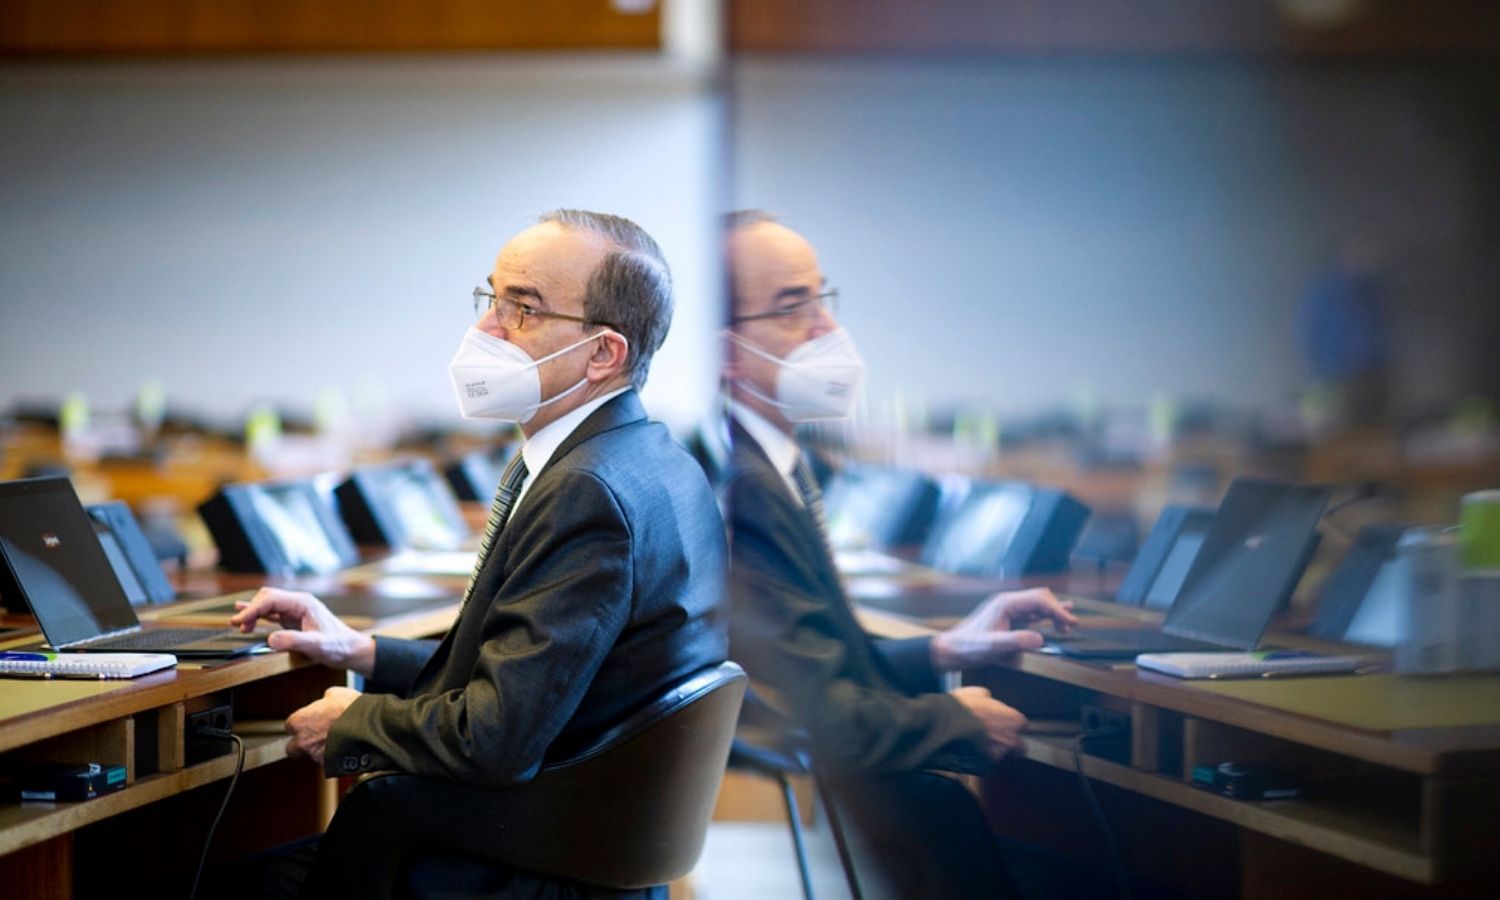 The co-chair of the Syrian Constitutional Committee, Hadi al-Bahra, attends the meetings of the Syrian Constitutional Committee in Geneva - 27 January 2020 (Violin Martin / United Nations)